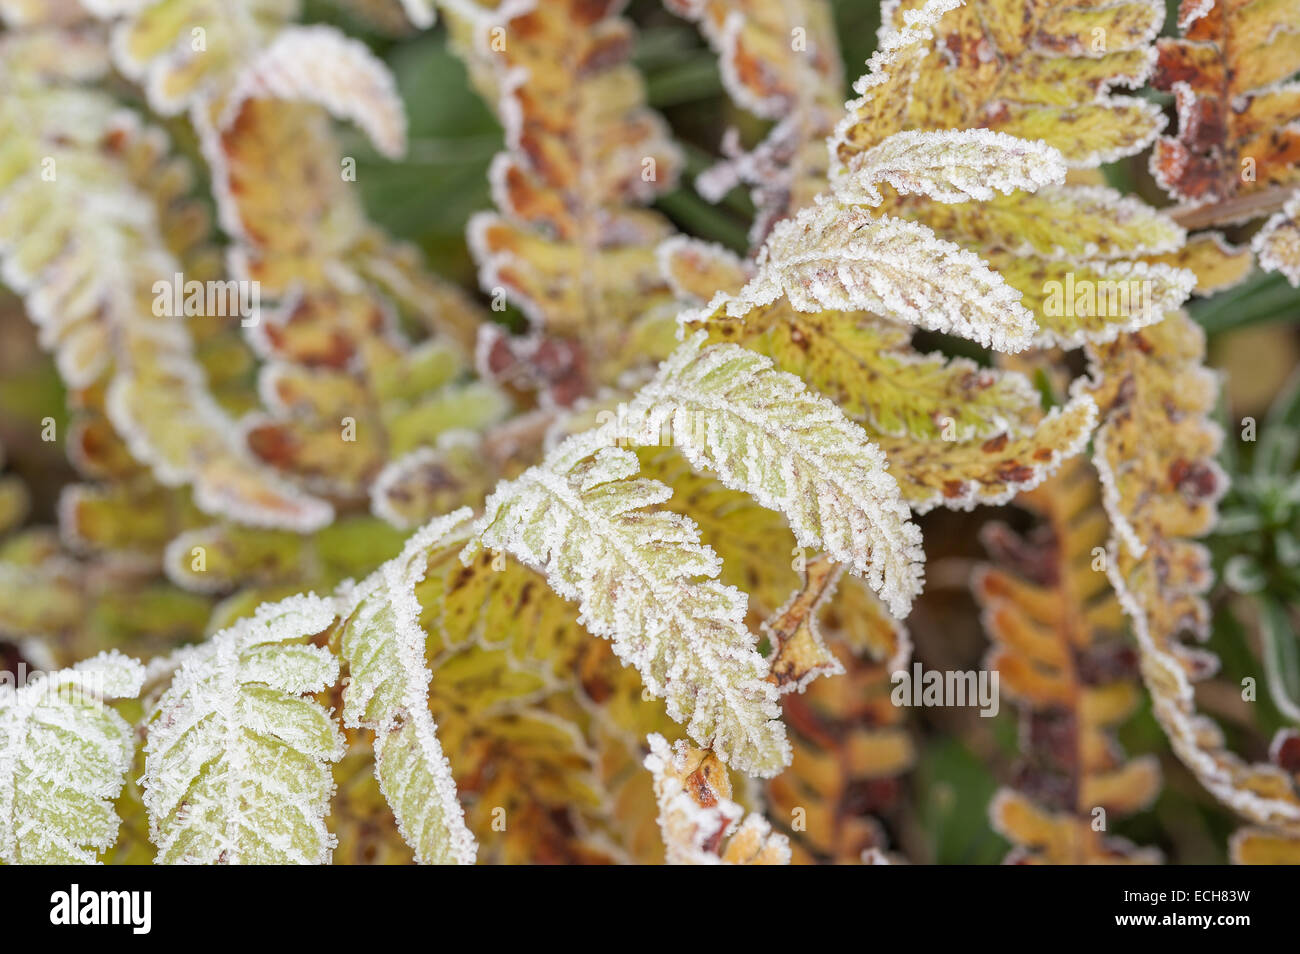 Dryopteris trailing fern frond curved stalk stem against pinnae blade coated in frost and ice in winter late autumn Stock Photo